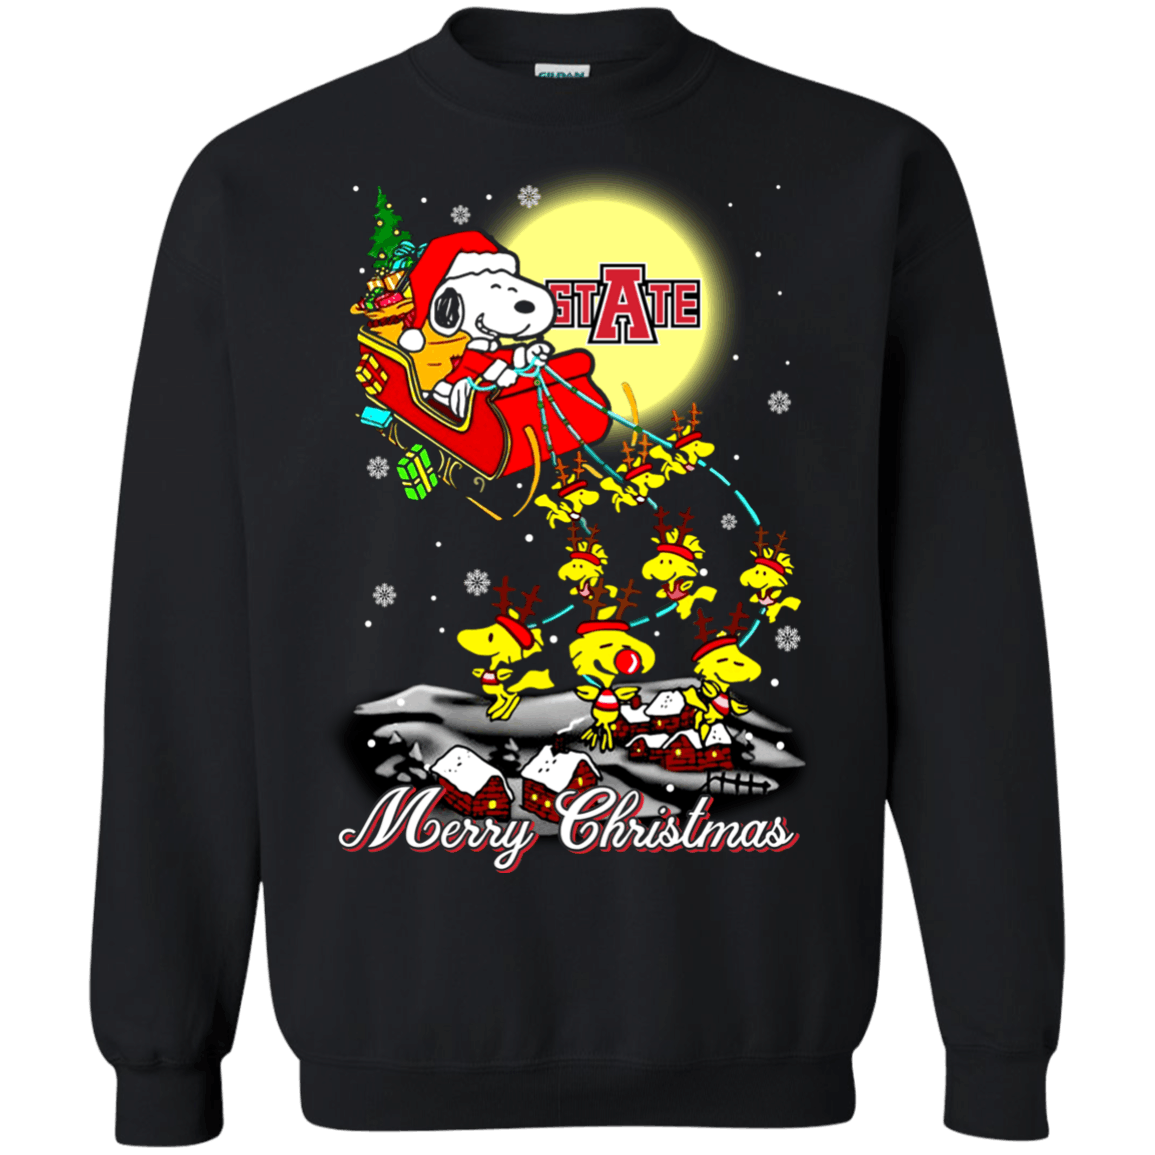 Awesome Arkansas State Red Wolves Ugly Christmas Sweater 2023S Santa Claus With Sleigh And Snoopy Sweatshirts